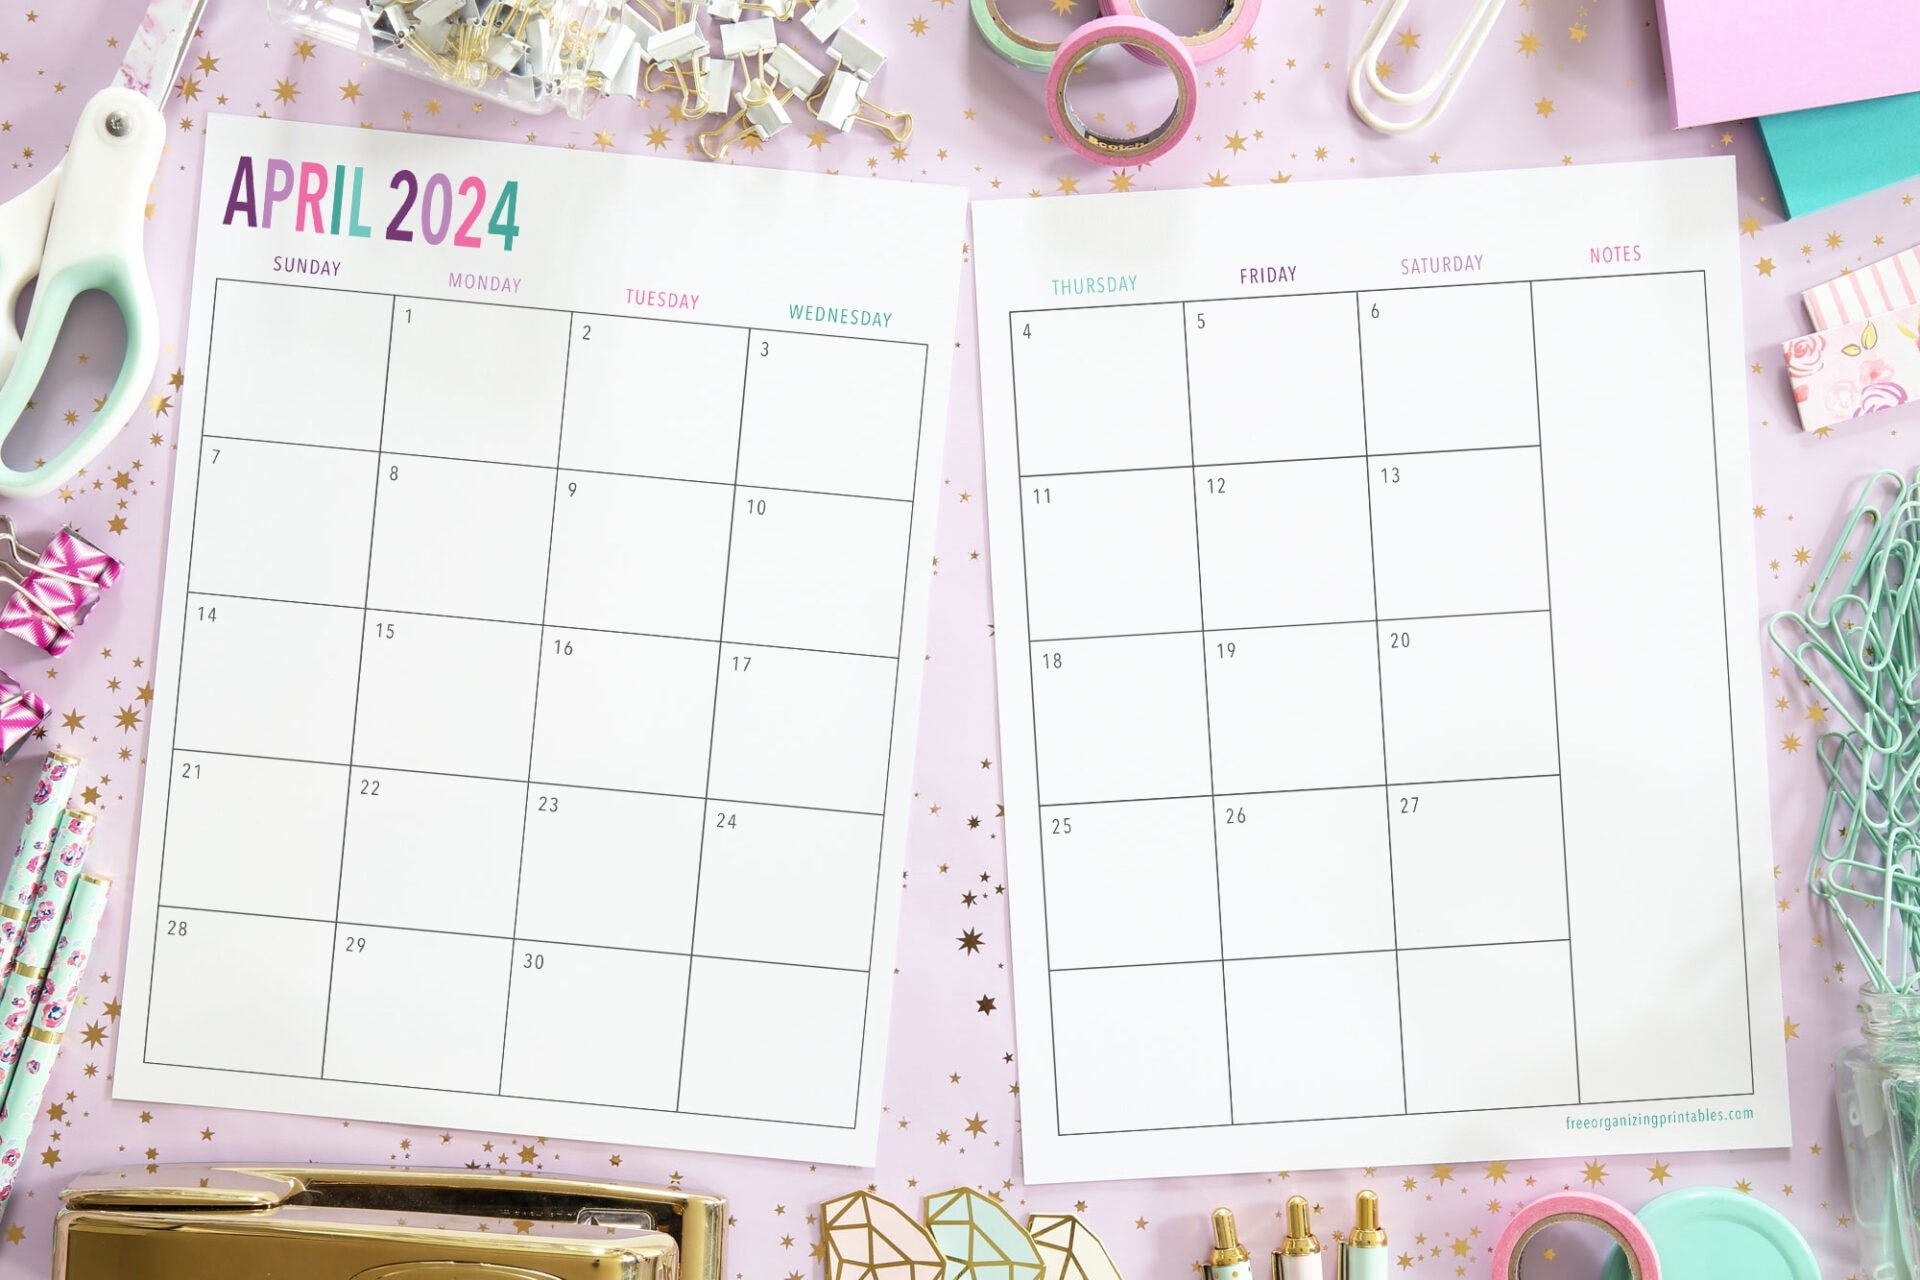 Free Printable 2 Page Blank Monthly Calendar 2024 in Free Printable Calendar 2024 2 Months Per Page With Holidays